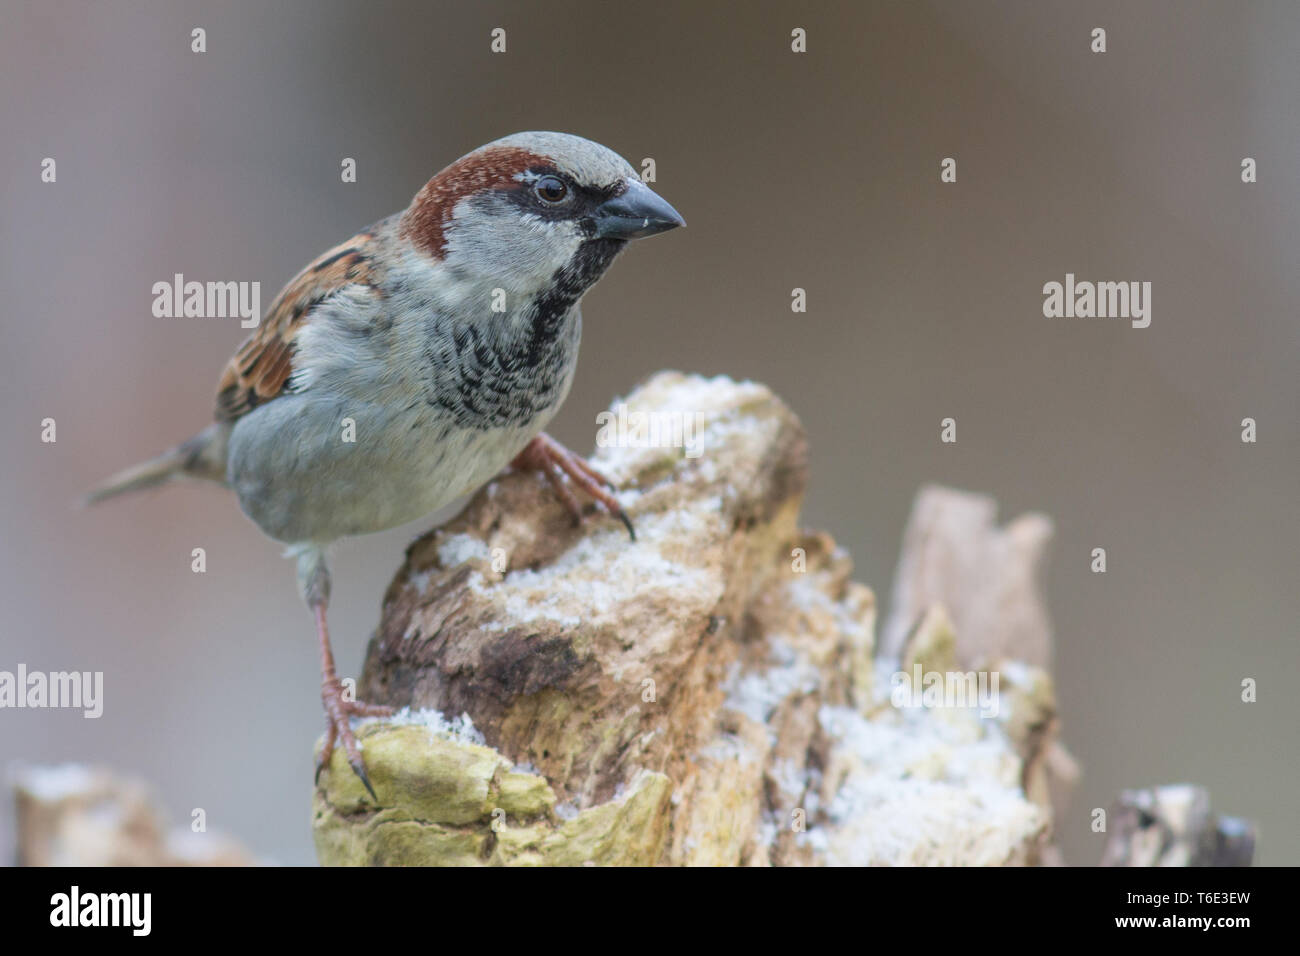 House Sparrow or English sparrow, Passer domesticus, europe, germany Stock Photo